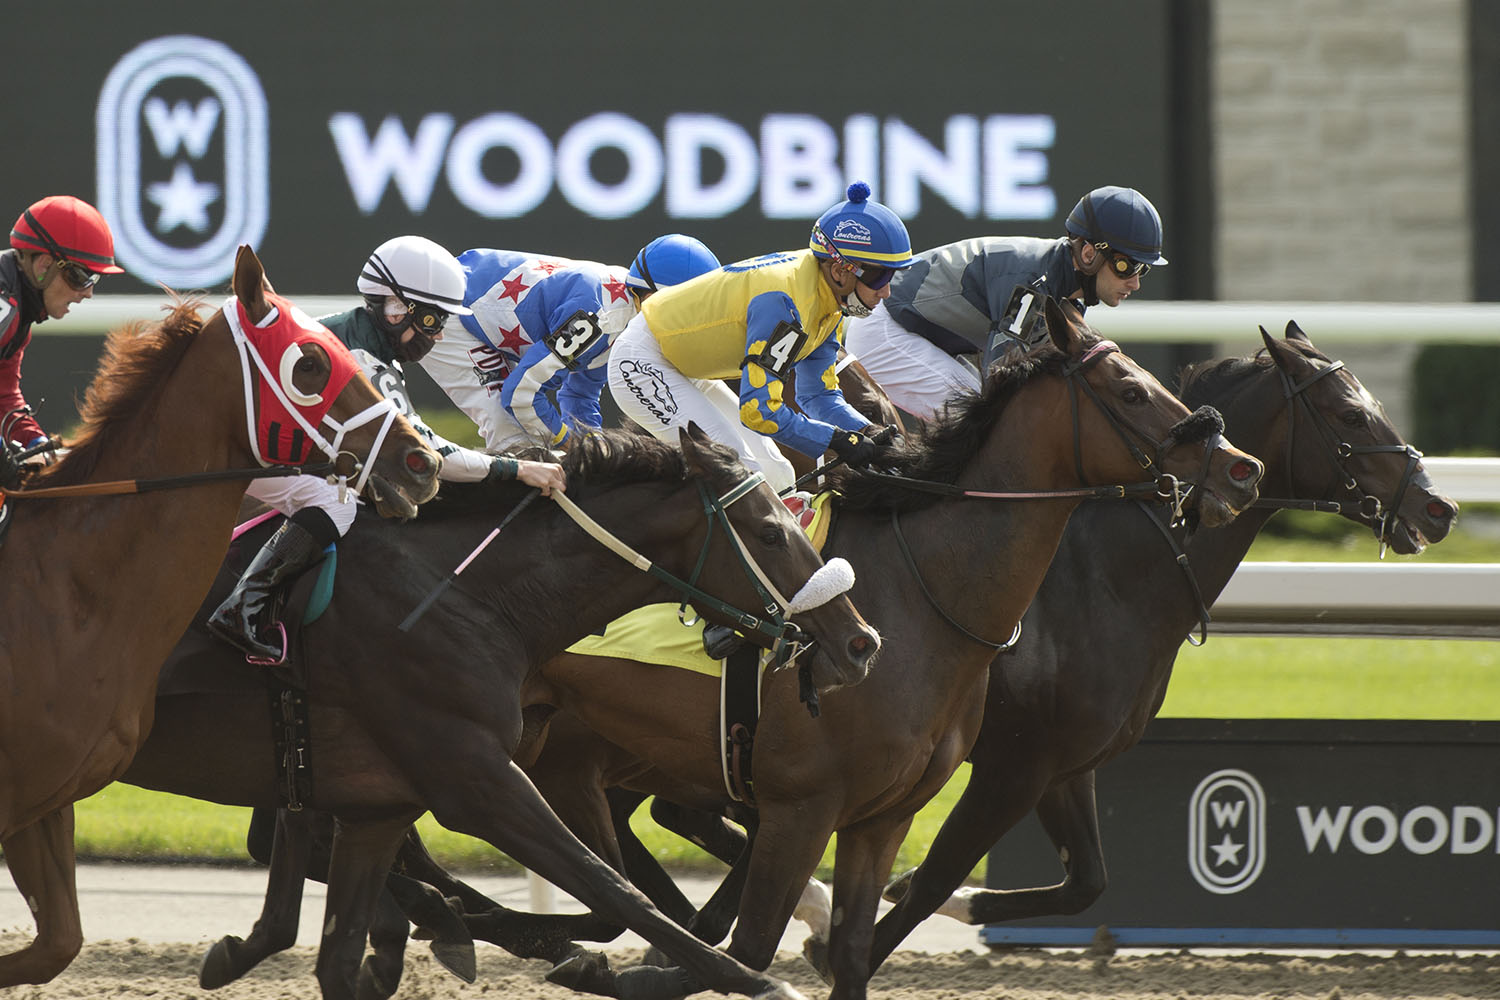 Woodbine Entertainment’s Shortened Thoroughbred Meet Down $50M in All-Sources Handle